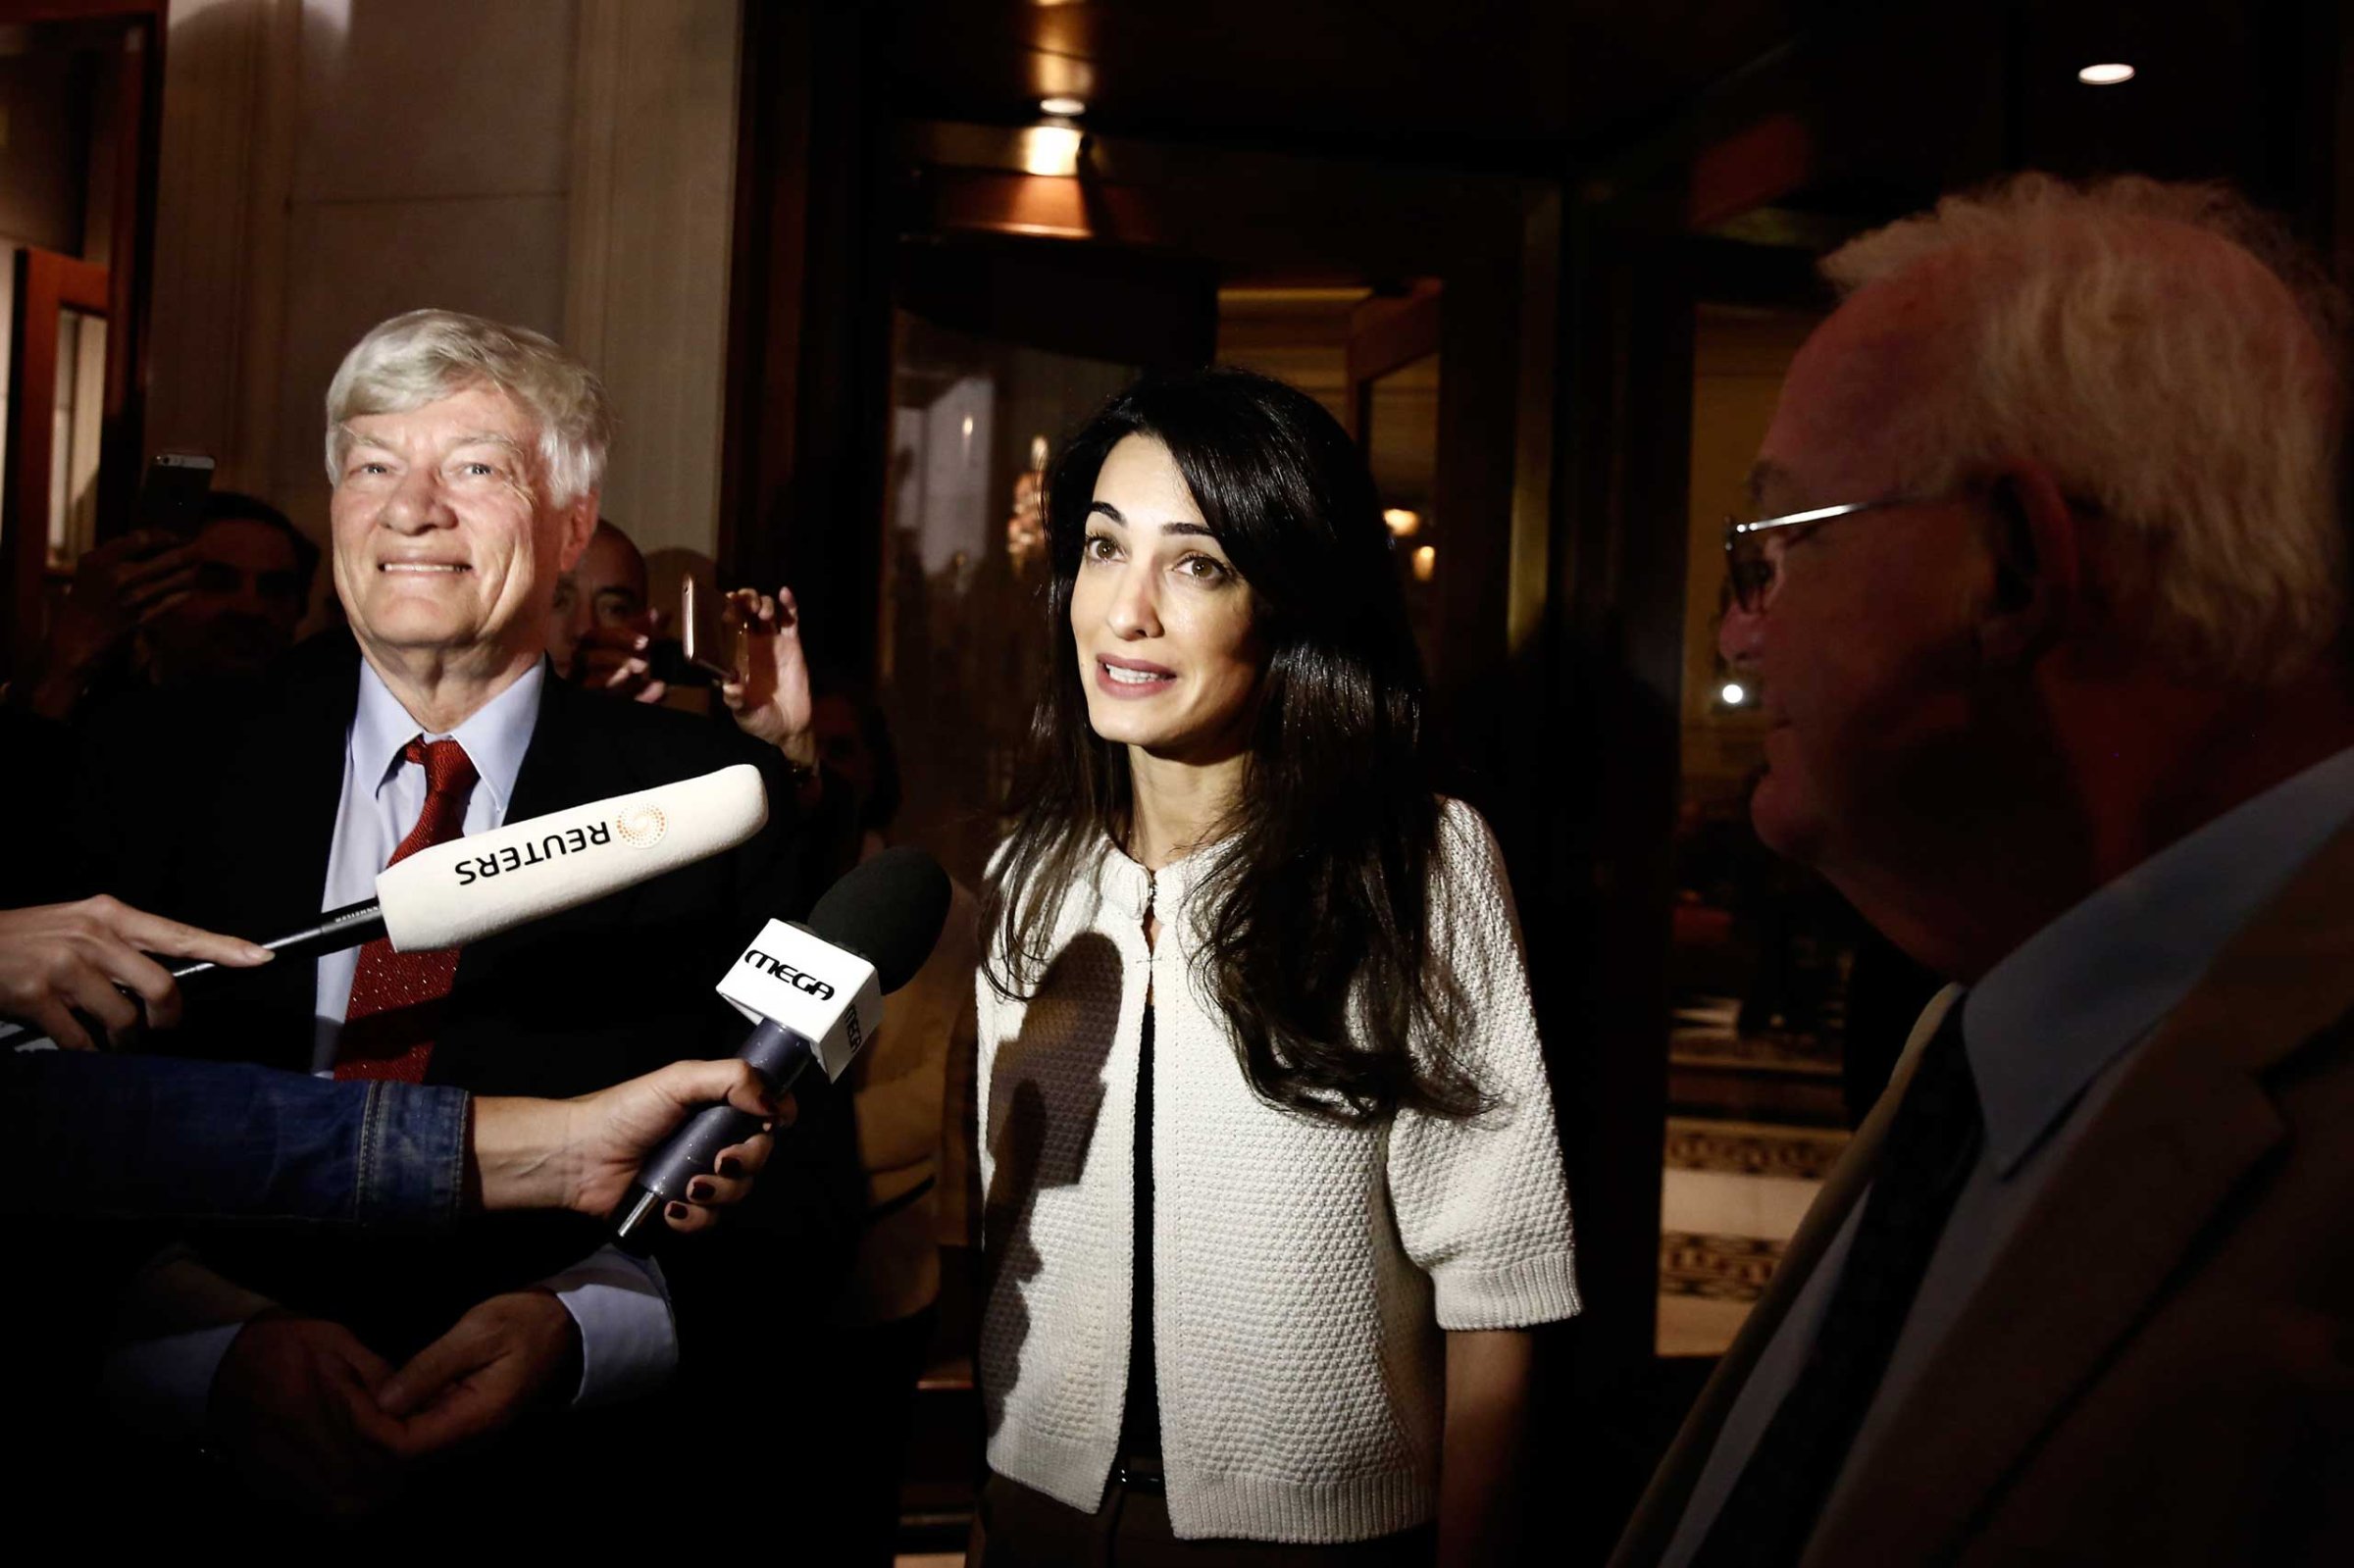 Human rights lawyer Amal Alamuddin Clooney speaks to media in Athens, Oct. 13, 2014.